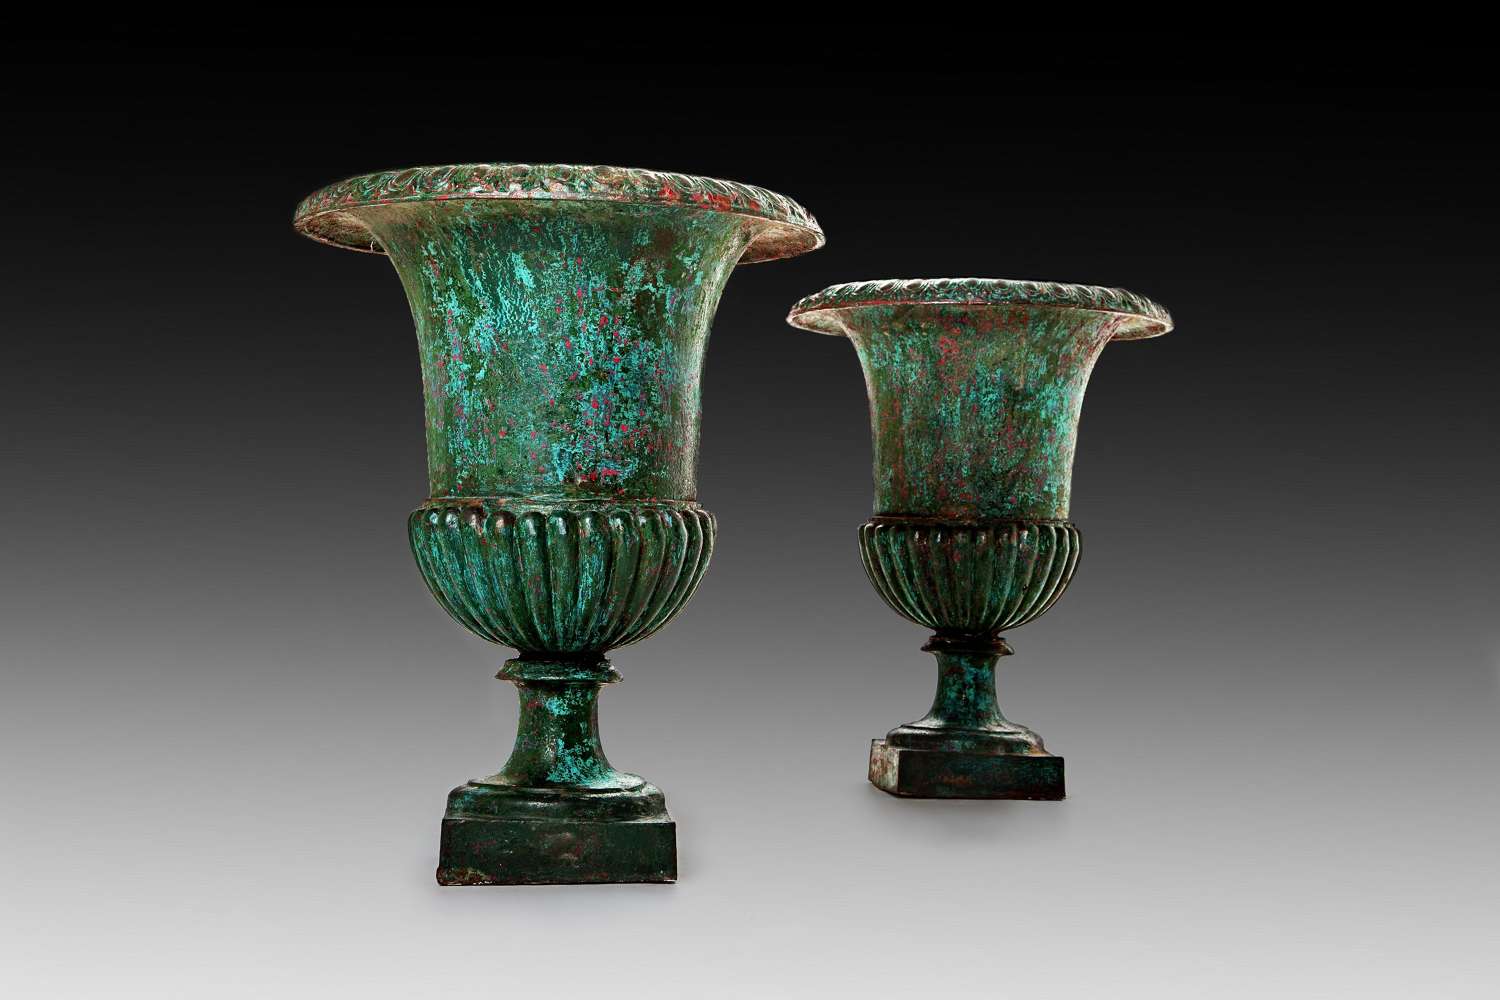 A pr of large 19th century classical urns